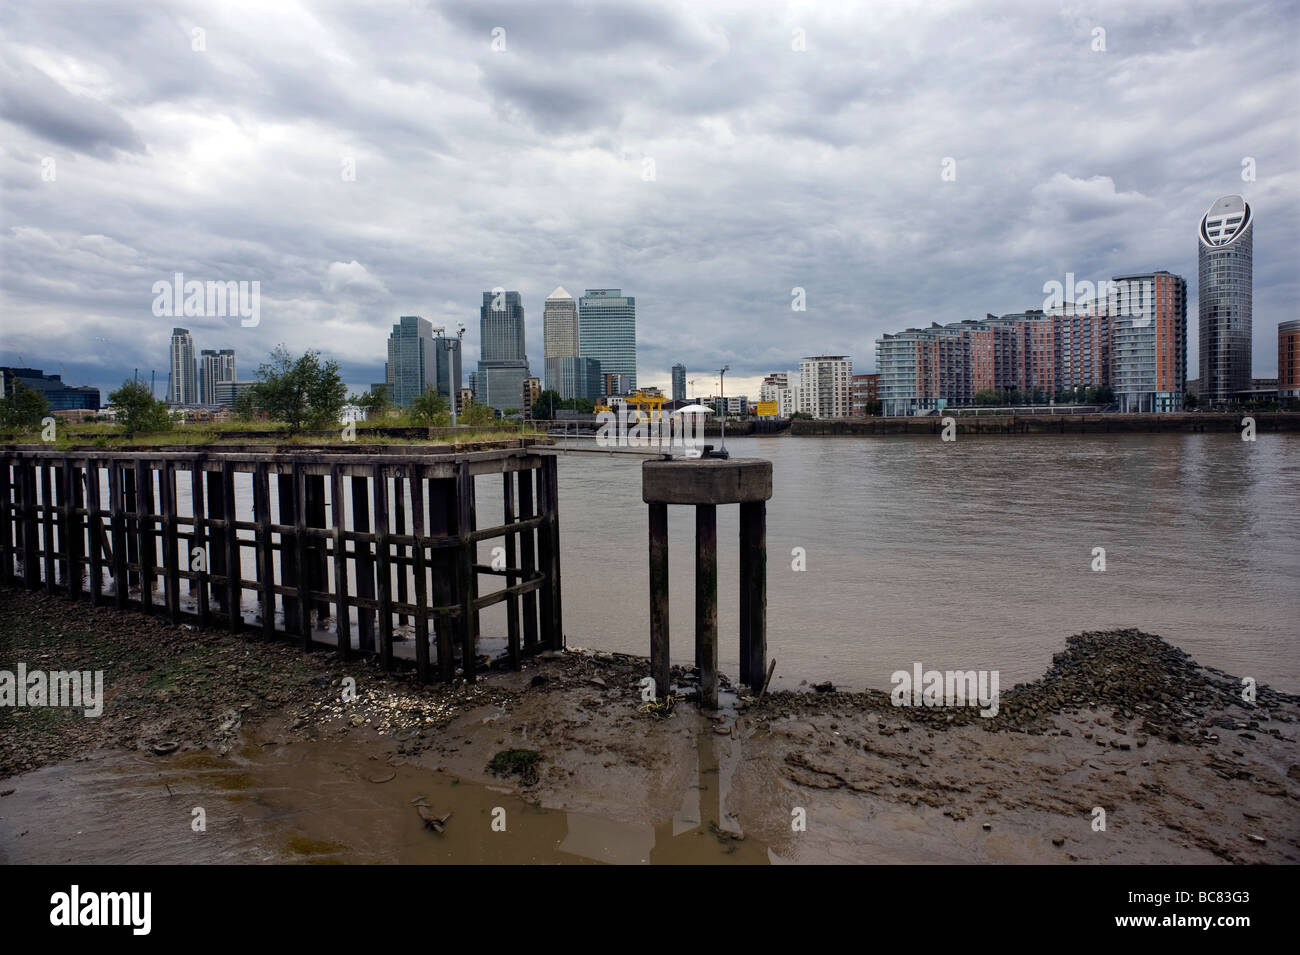 River Thames Canary Wharf Isle of Dogs Housing Offices modern London Britain apartments flats Riverside Footpath view Old wharf Stock Photo